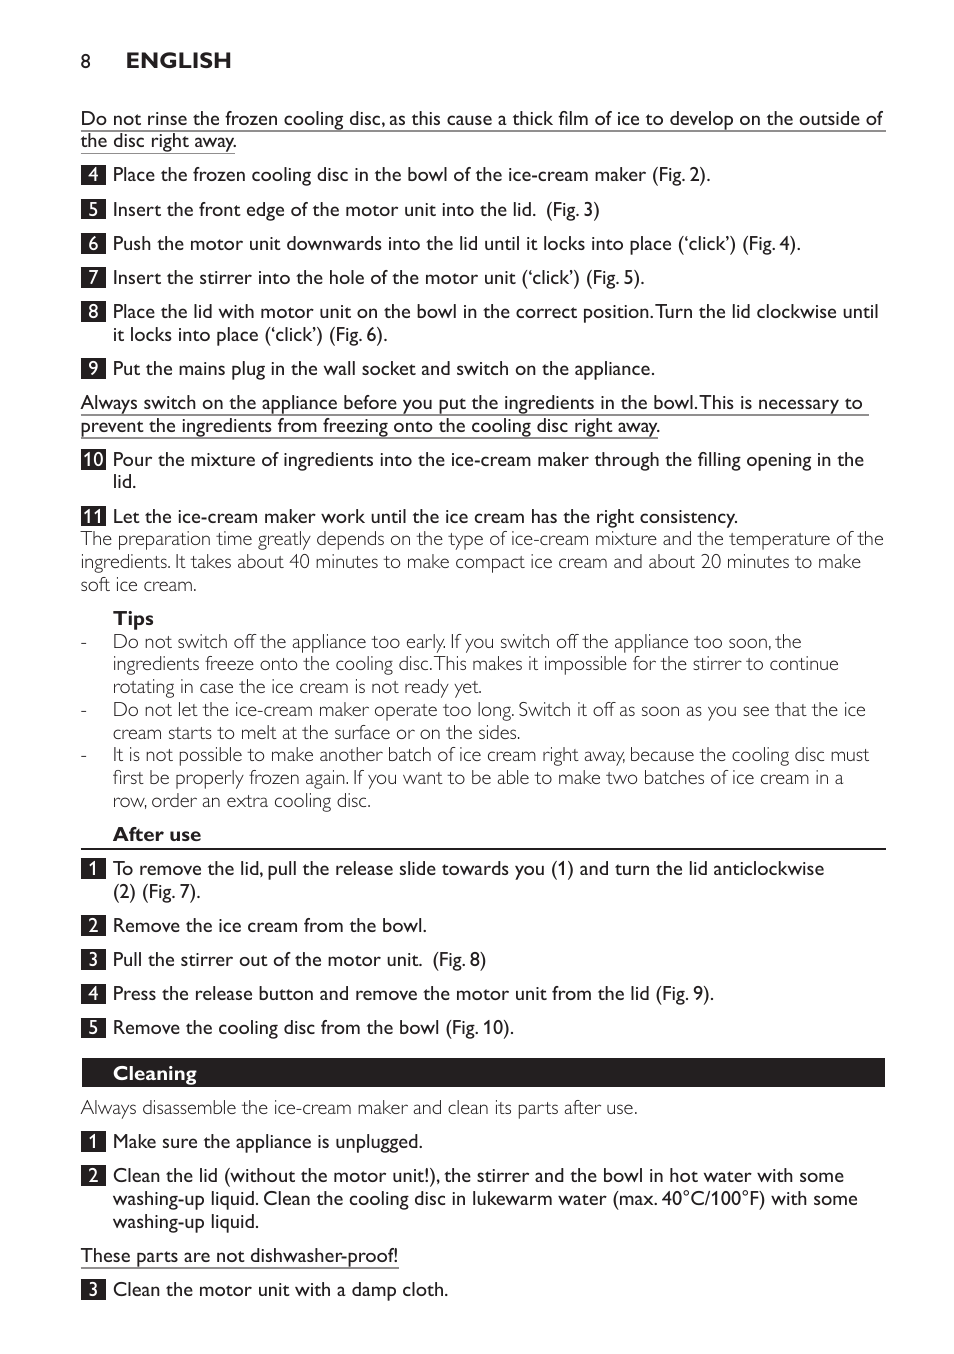 Tips, After use, Cleaning | Philips HR2304 User Manual | Page 8 / 32